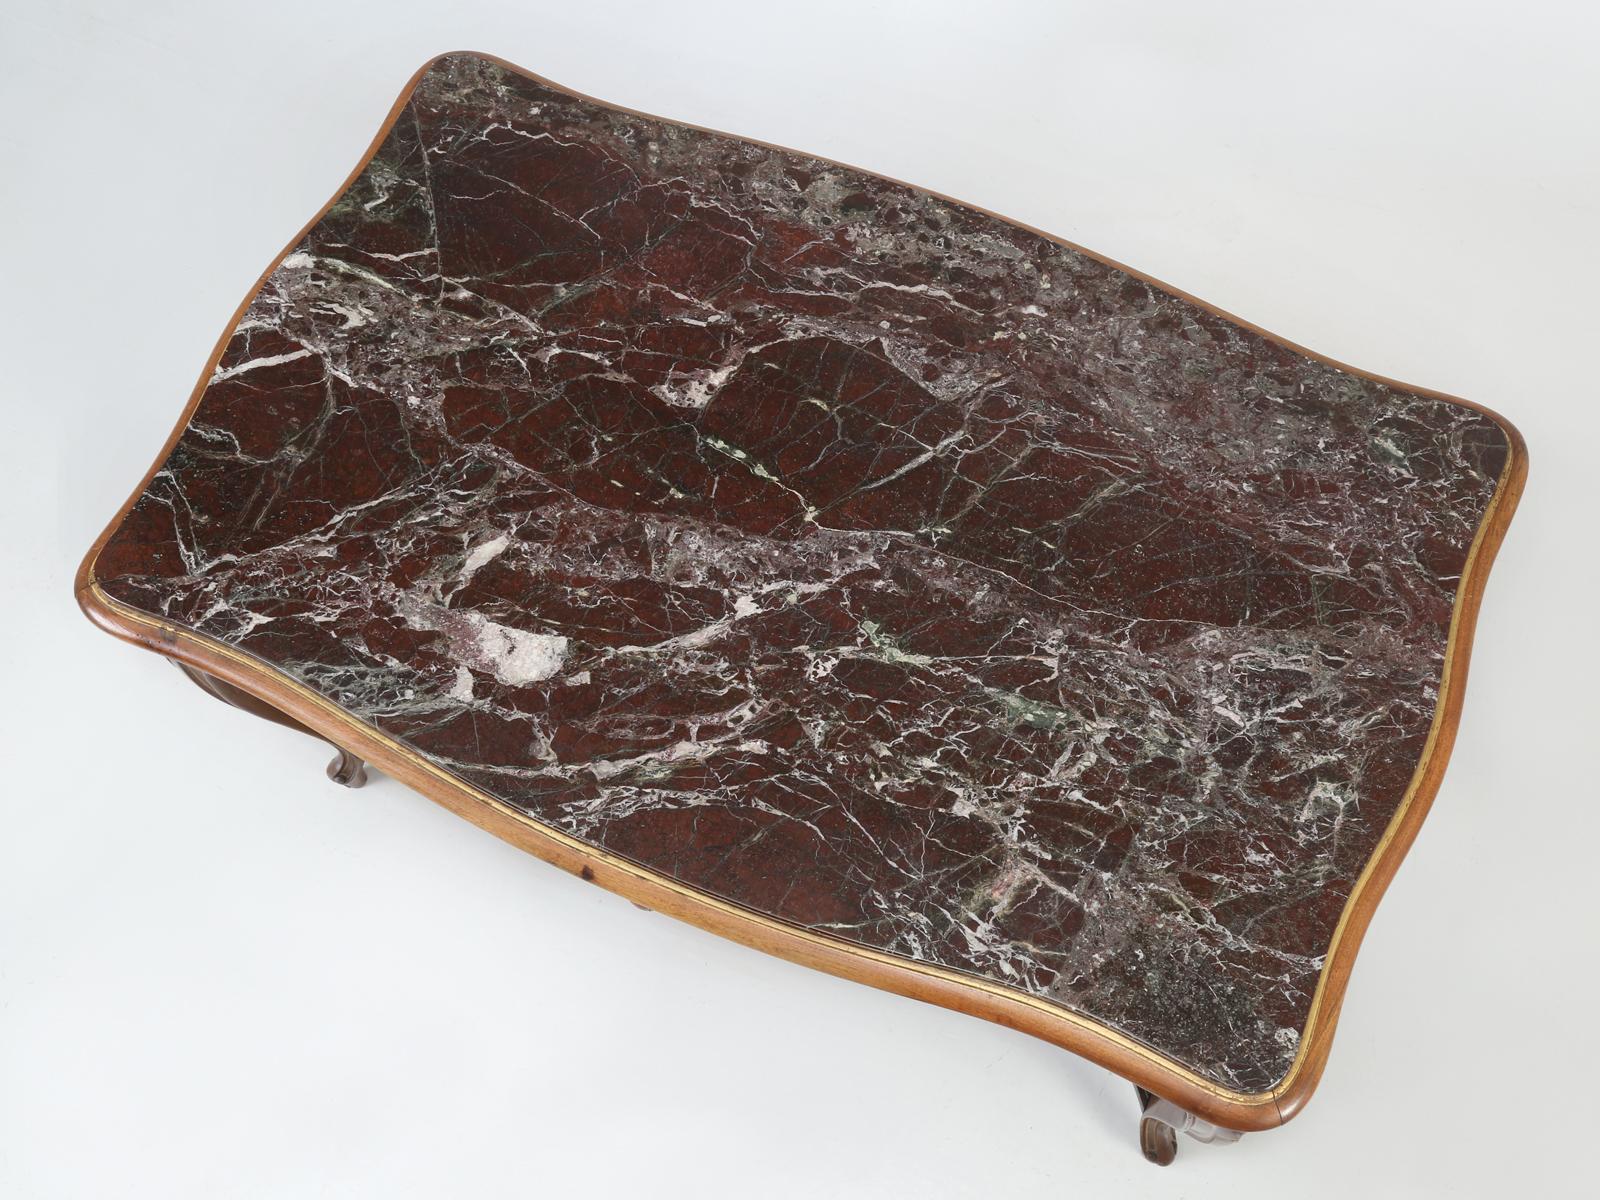 Antique Italian Louis XV dining table or parlor table, in an all original condition. There are a couple of cracks in the marble top, but they at first glance appear to be just the veining of the marble and you have to look twice to notice them.